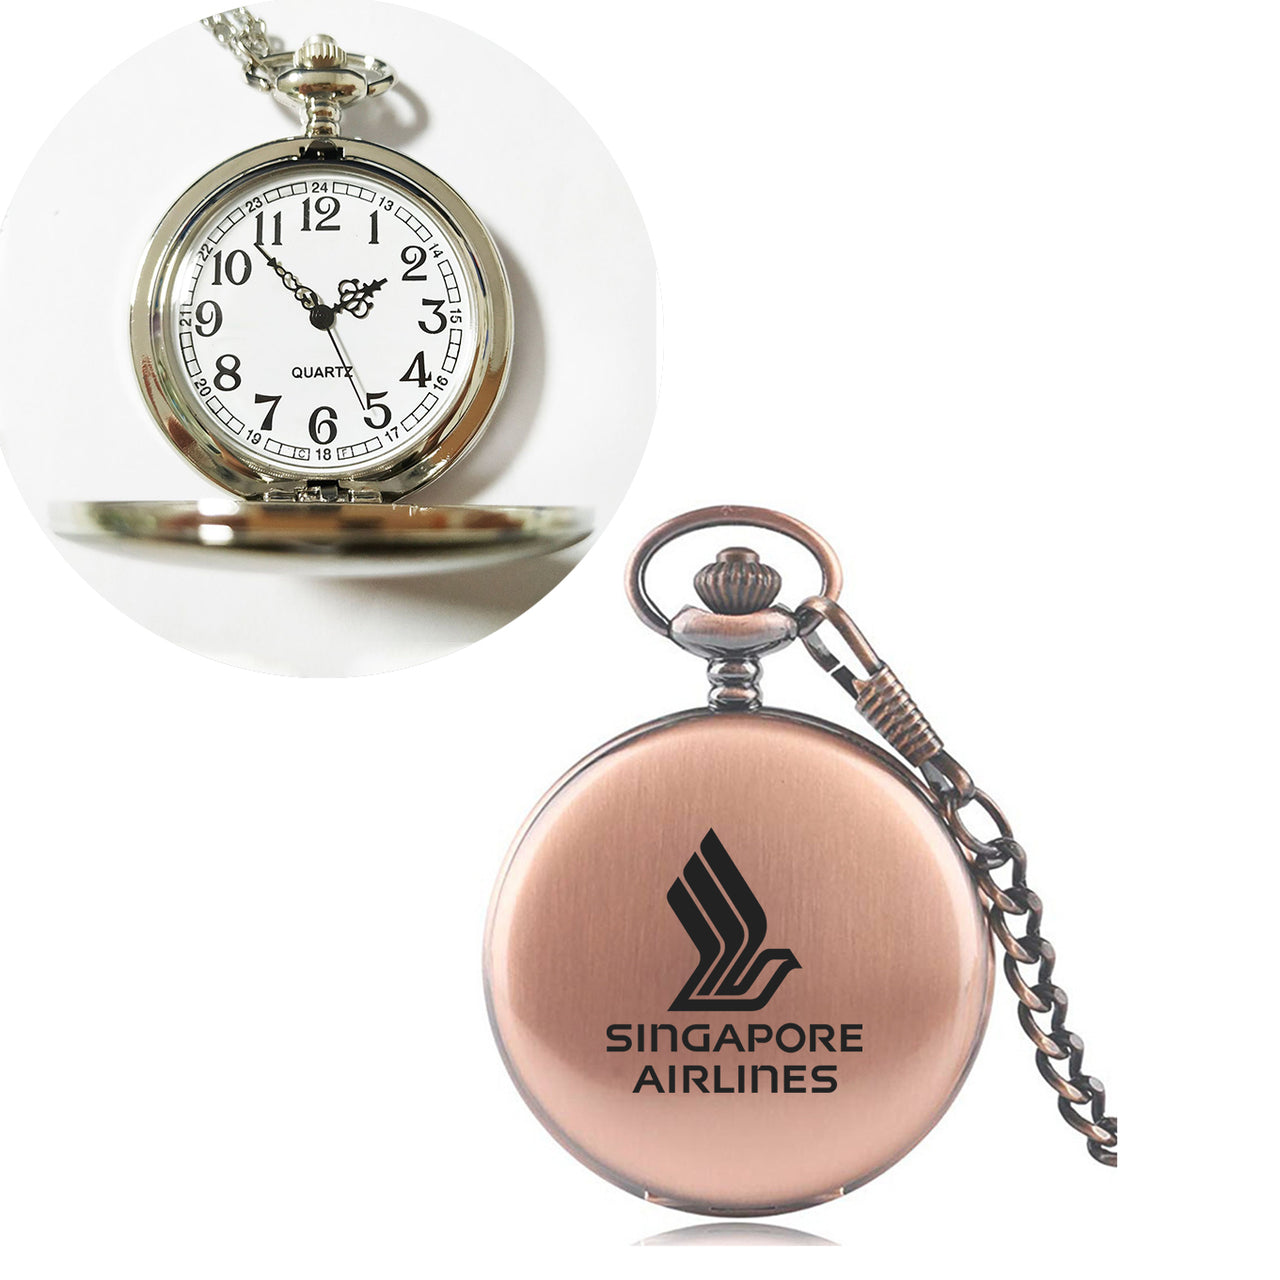 Singapore Airlines Designed Pocket Watches